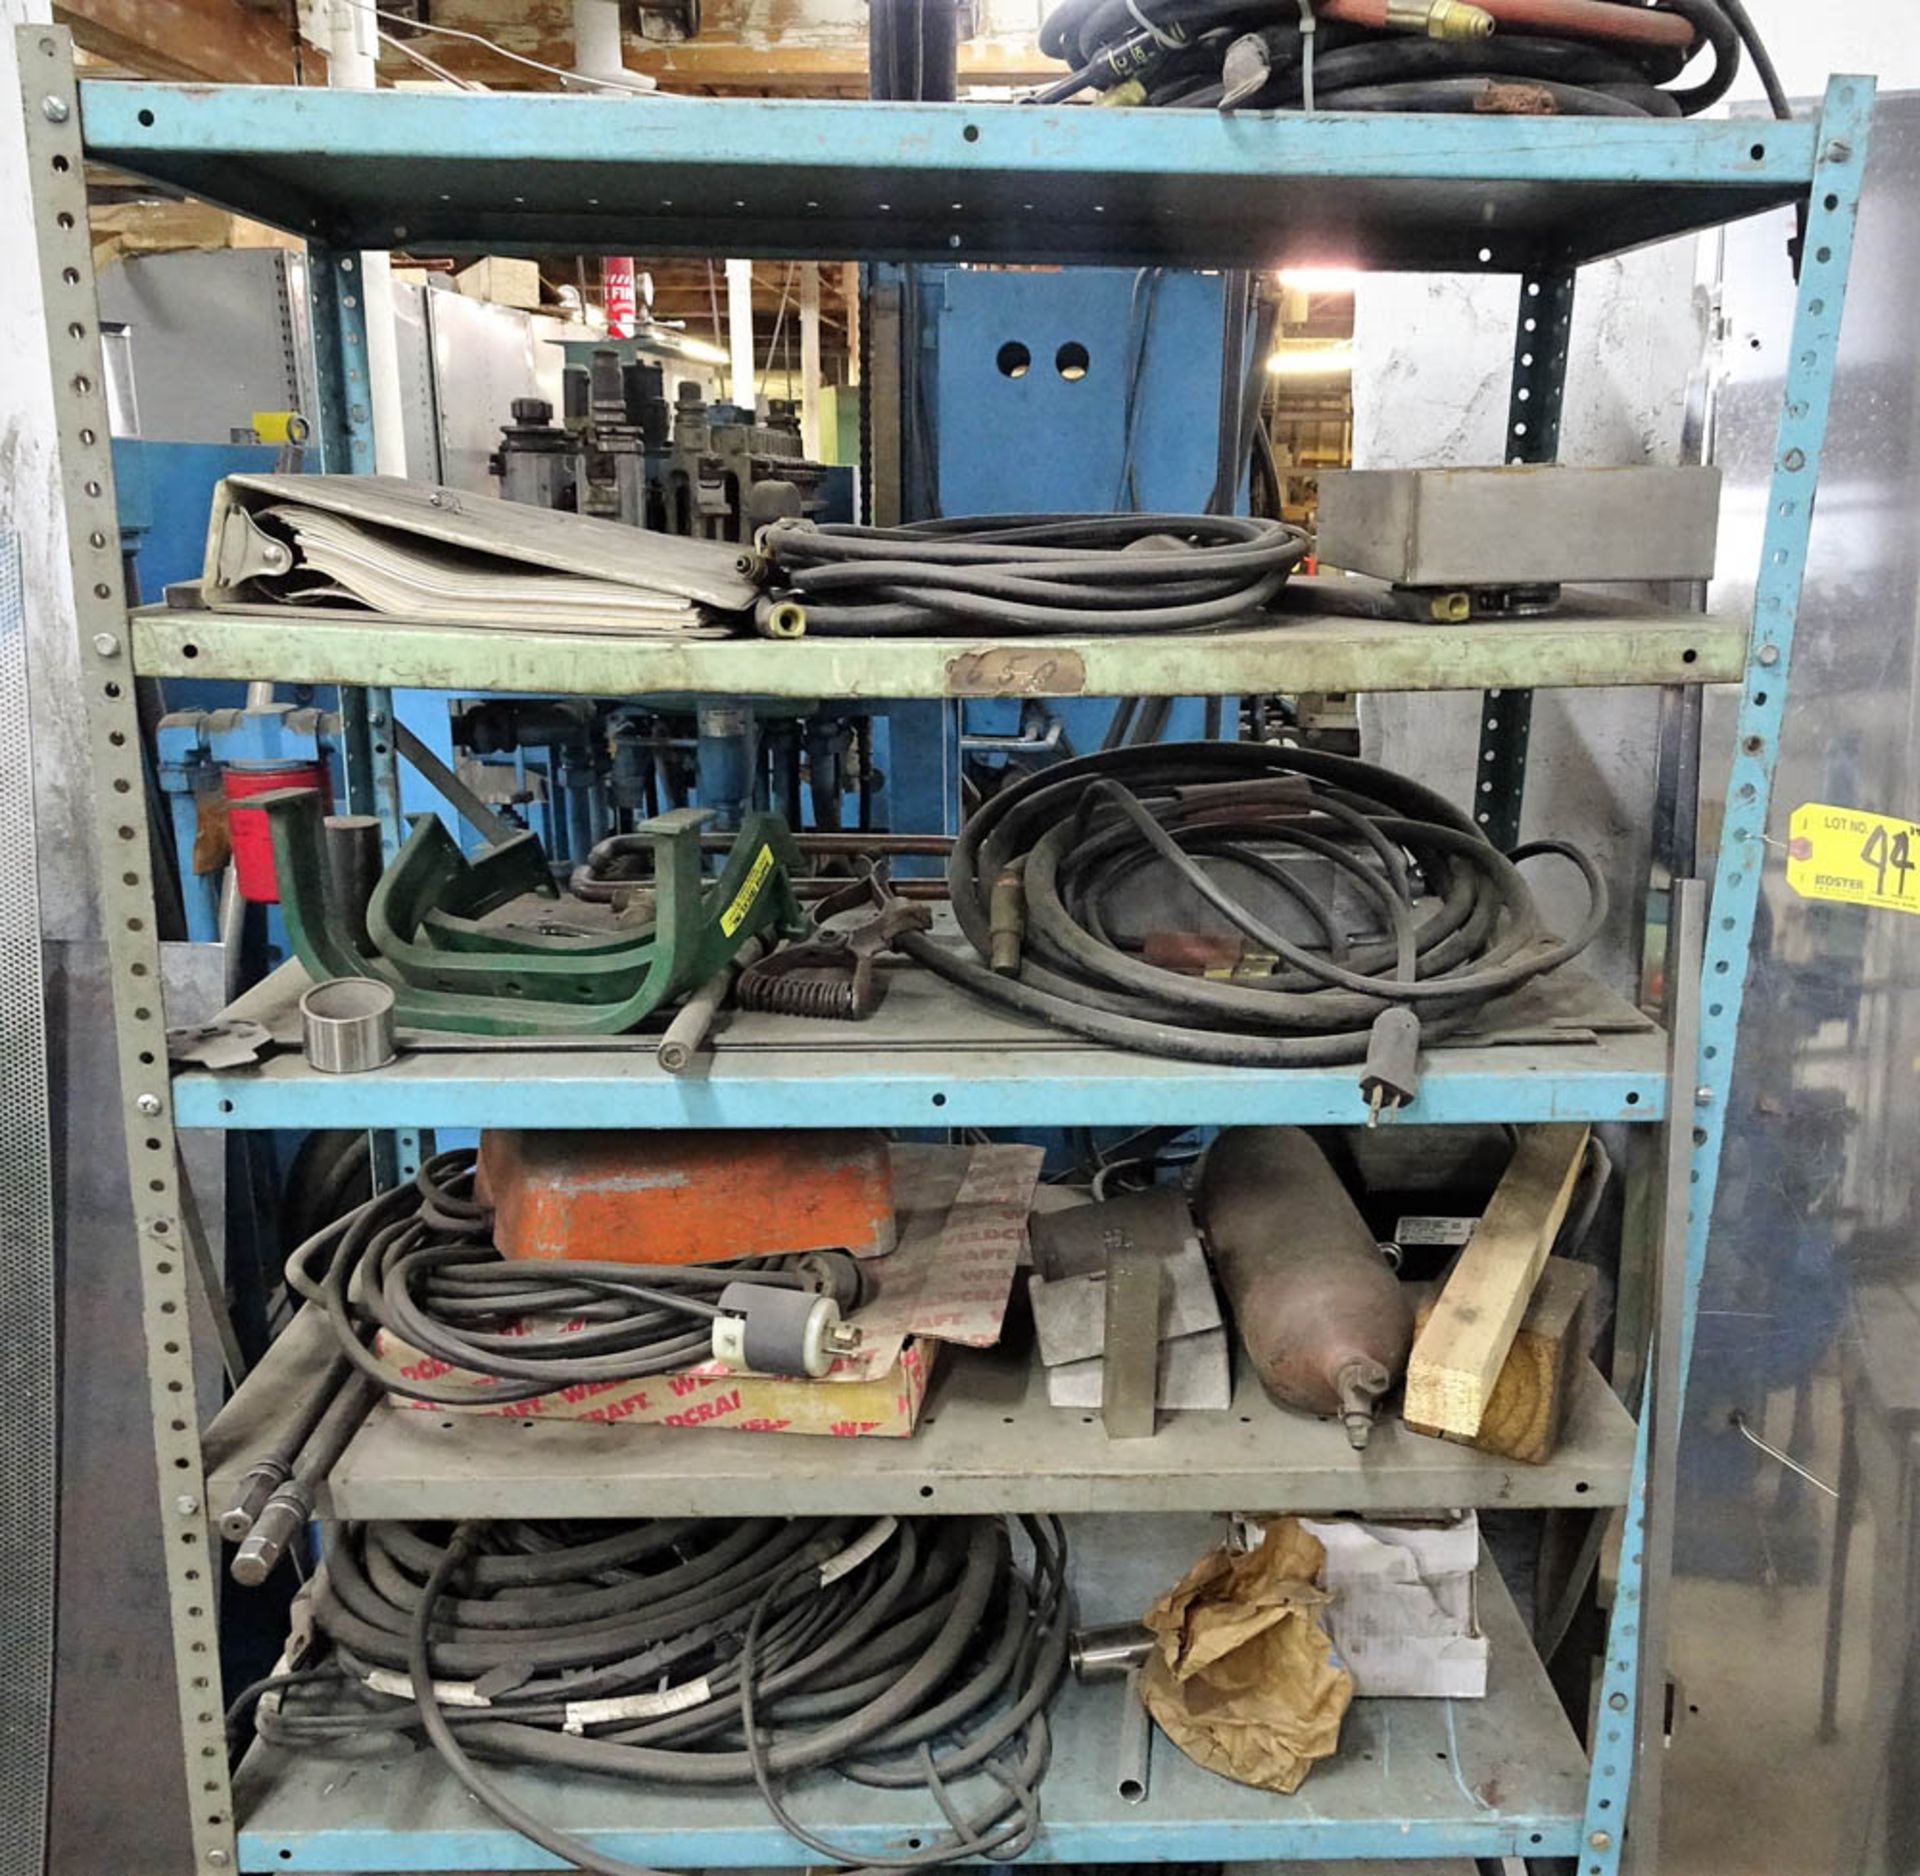 (4) MEDIUM DUTY RACKS WITH CONTENTS, CONTENTS INCLUDE BUT ARE NOT LIMITED TO: WELDING MASKS, LIFTING - Image 3 of 4